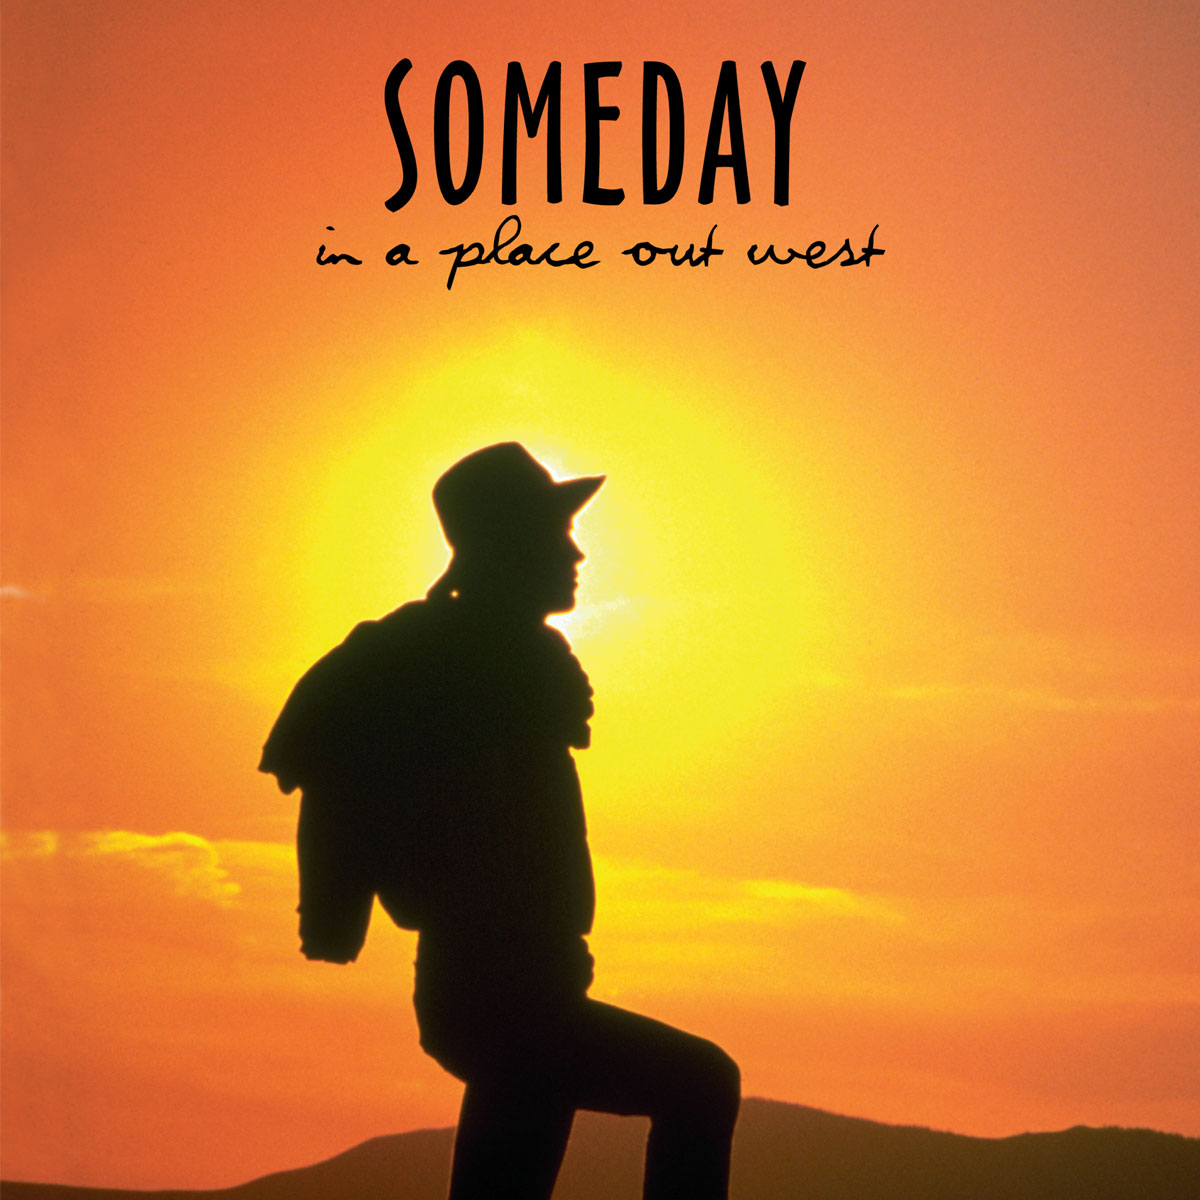 Someday in a place out West book design by Daryl Stevens